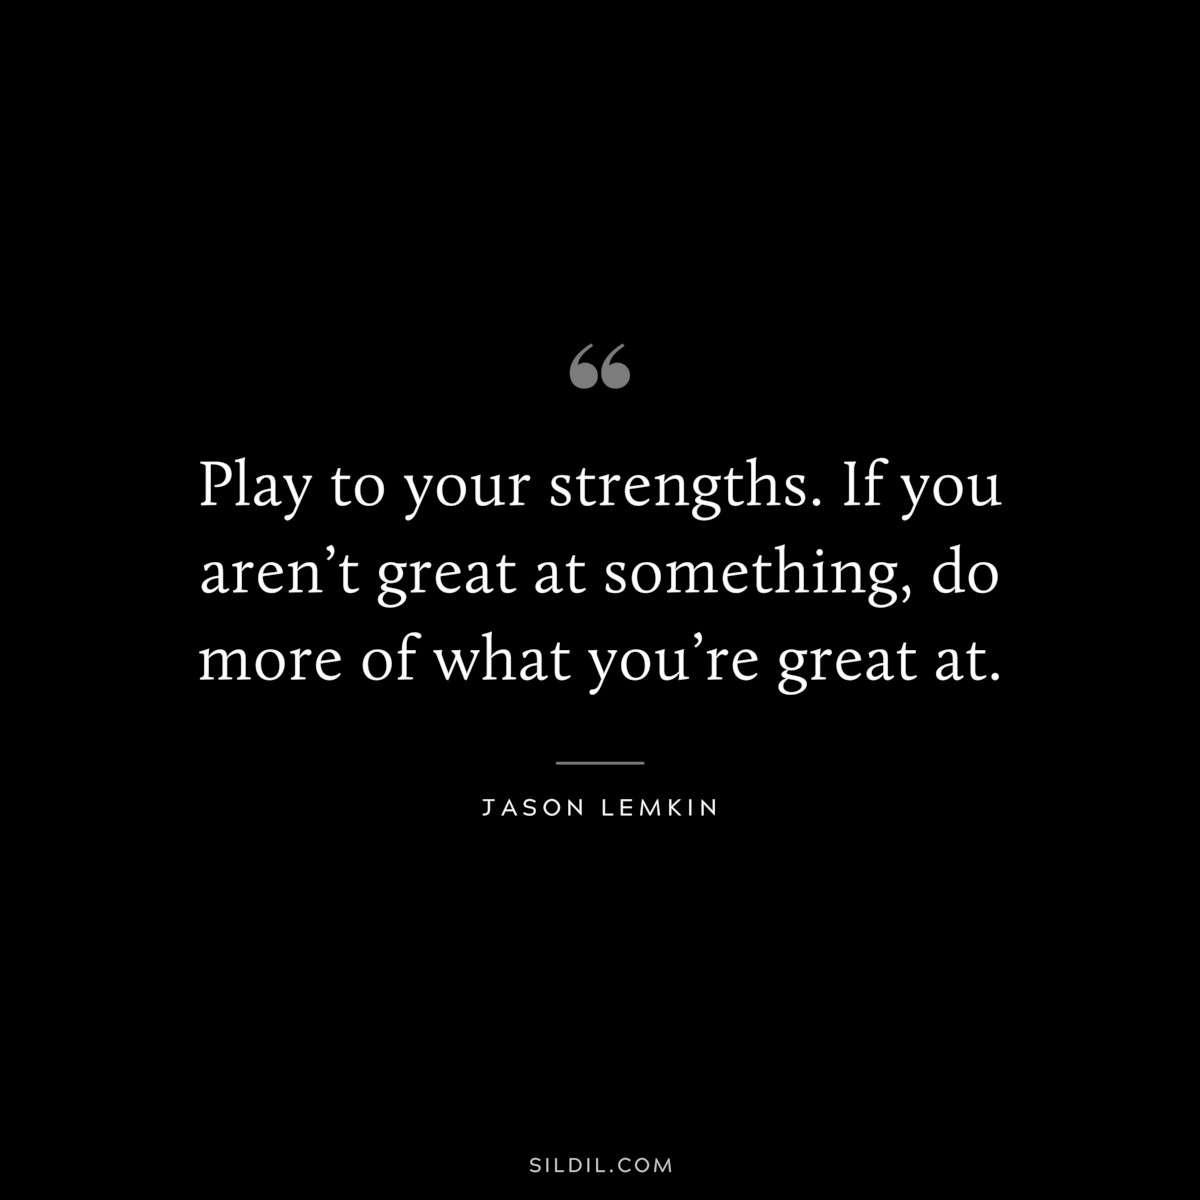 Play to your strengths. If you aren’t great at something, do more of what you’re great at. ― Jason Lemkin